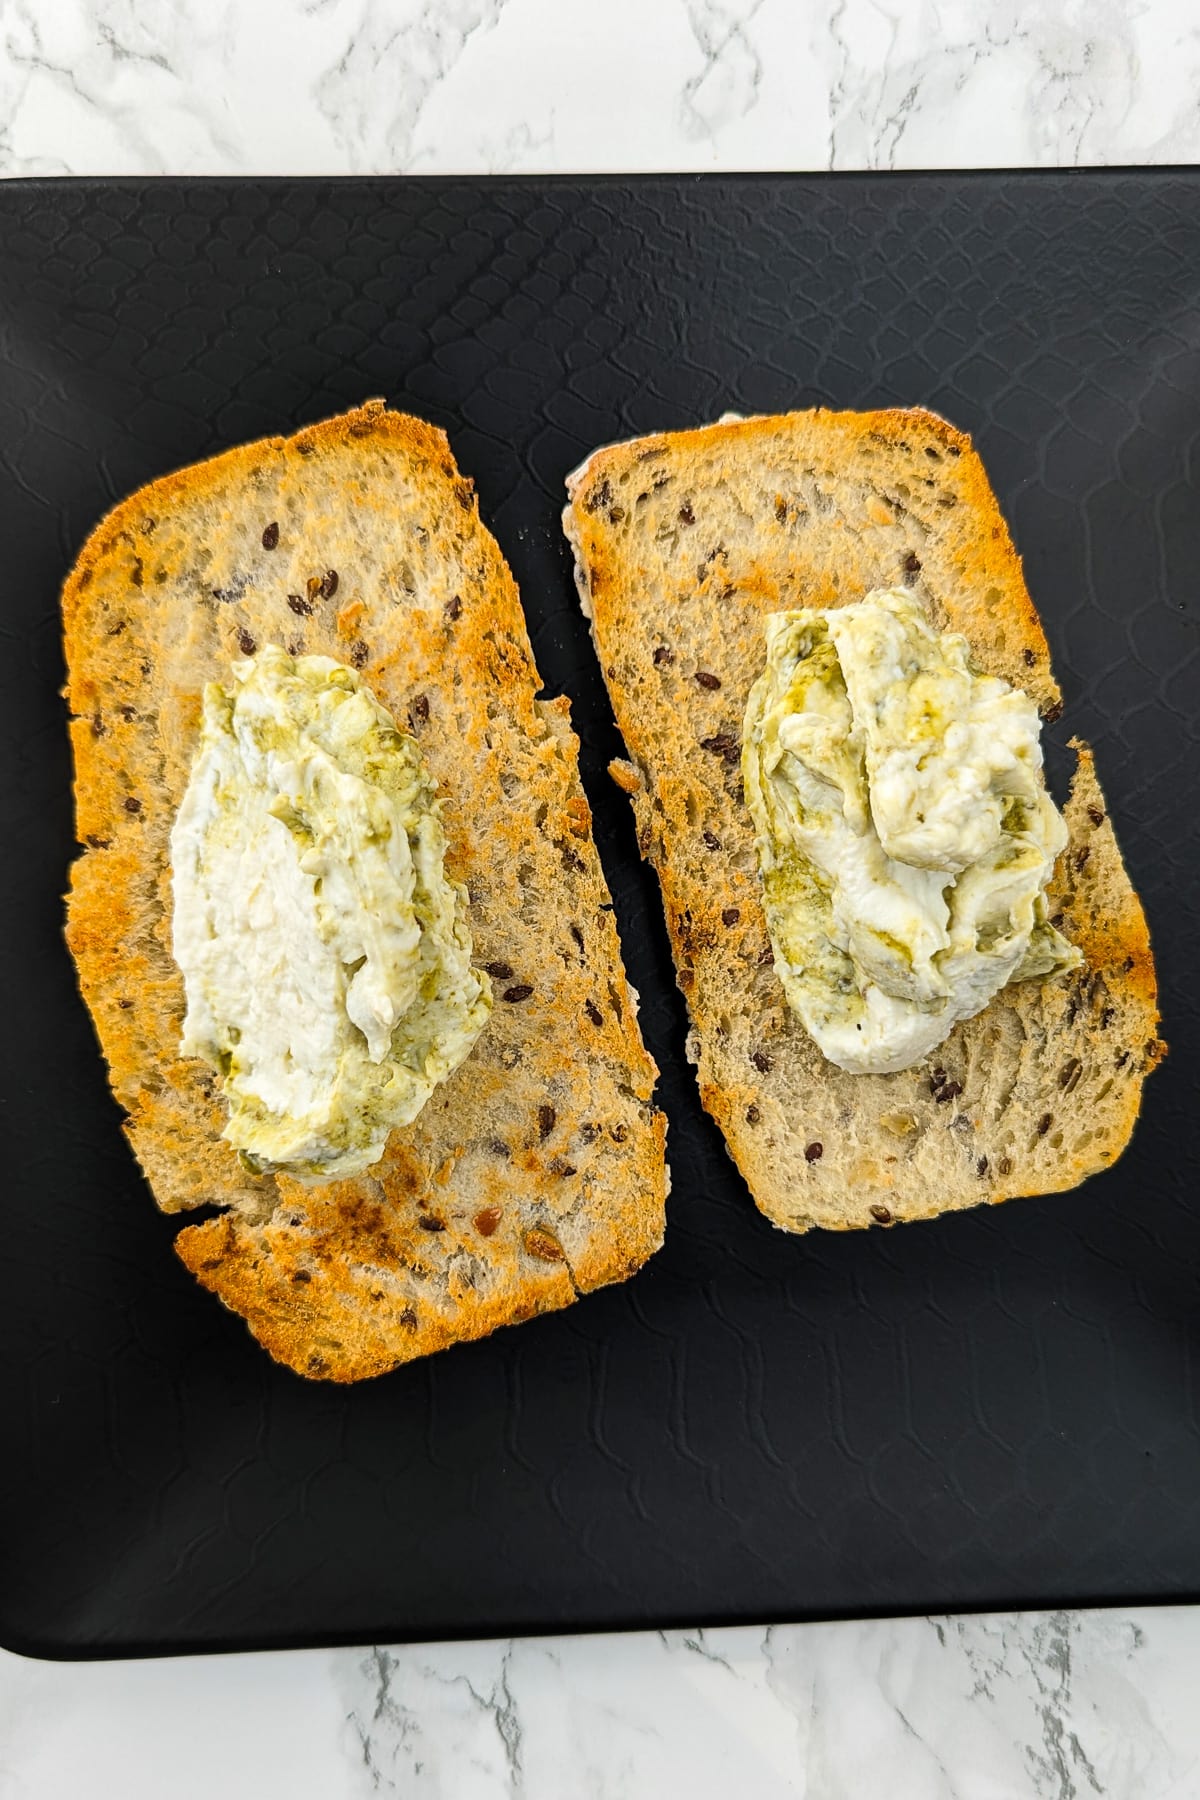 Two slices of bread topped with a mix of cream cheese and basil pesto.